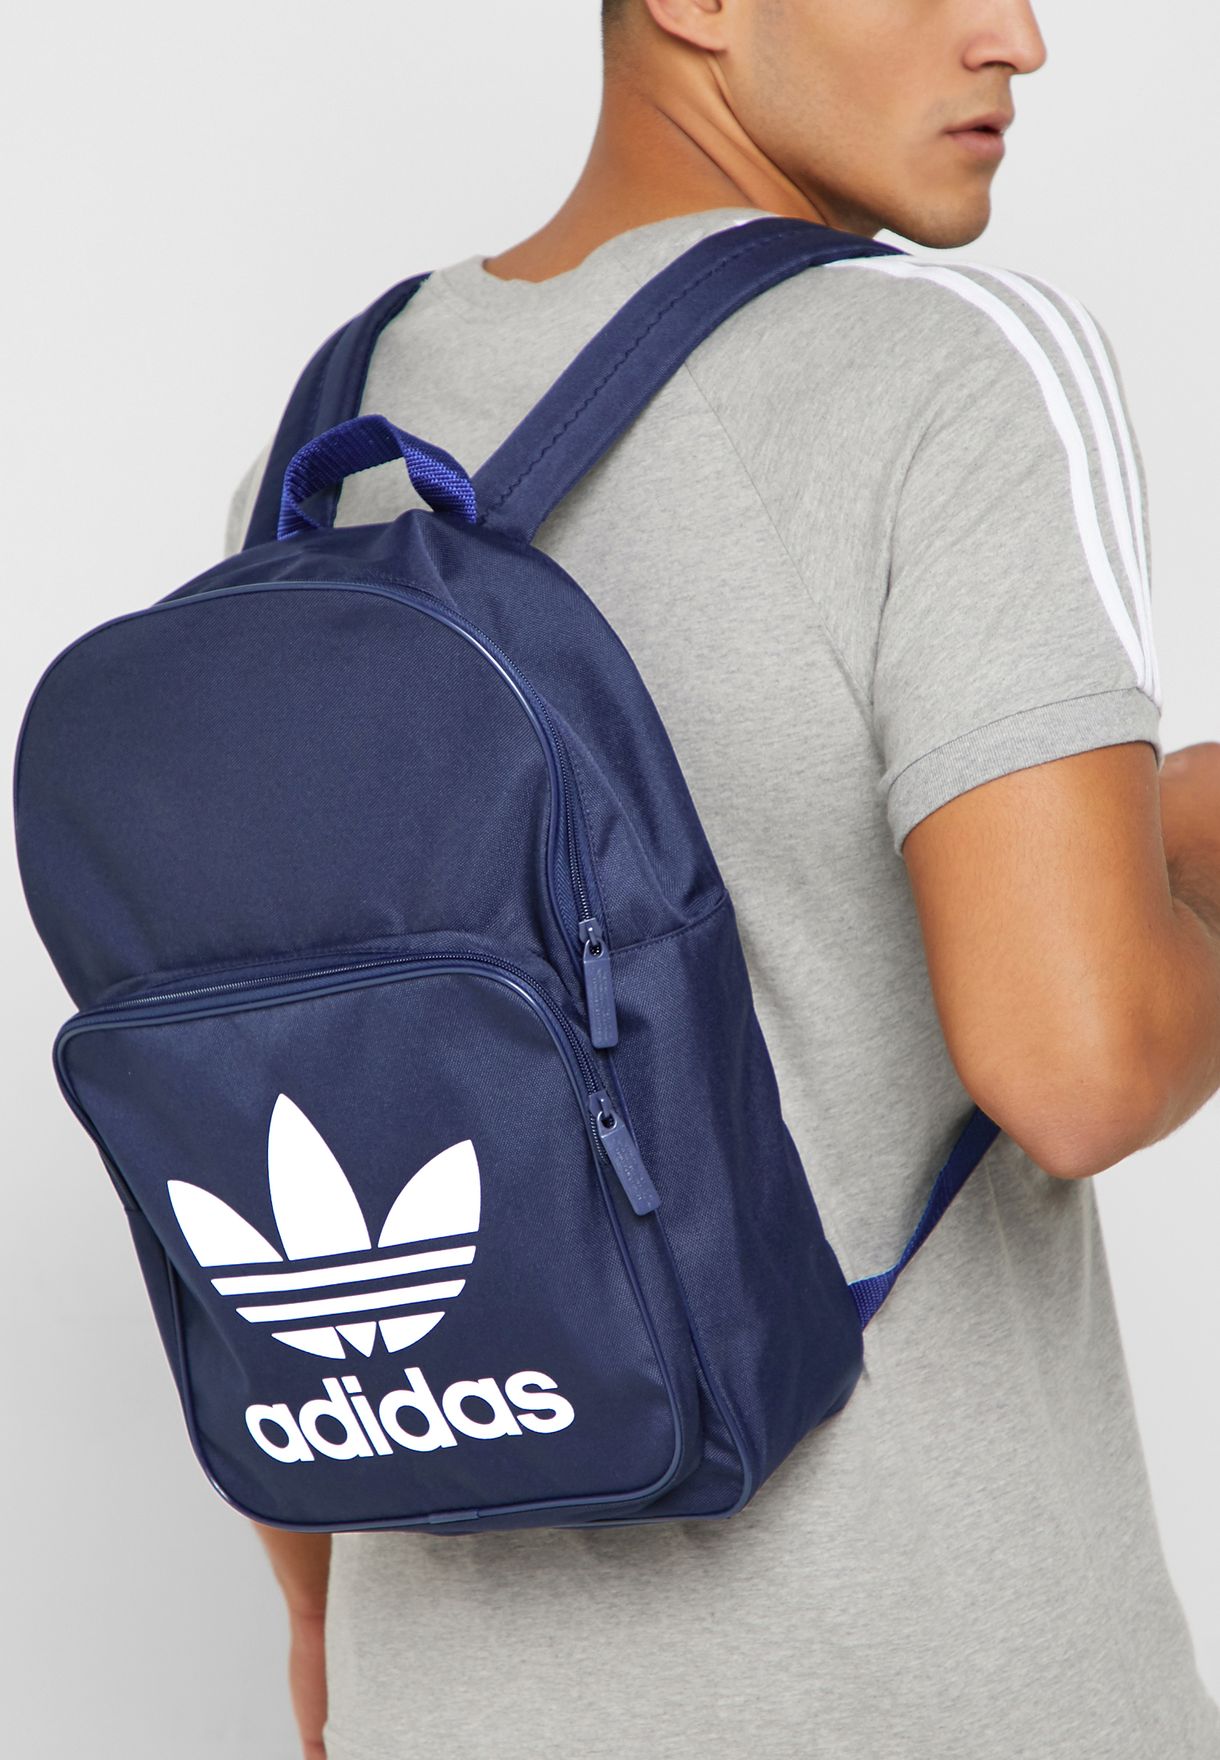 adidas classic trefoil backpack